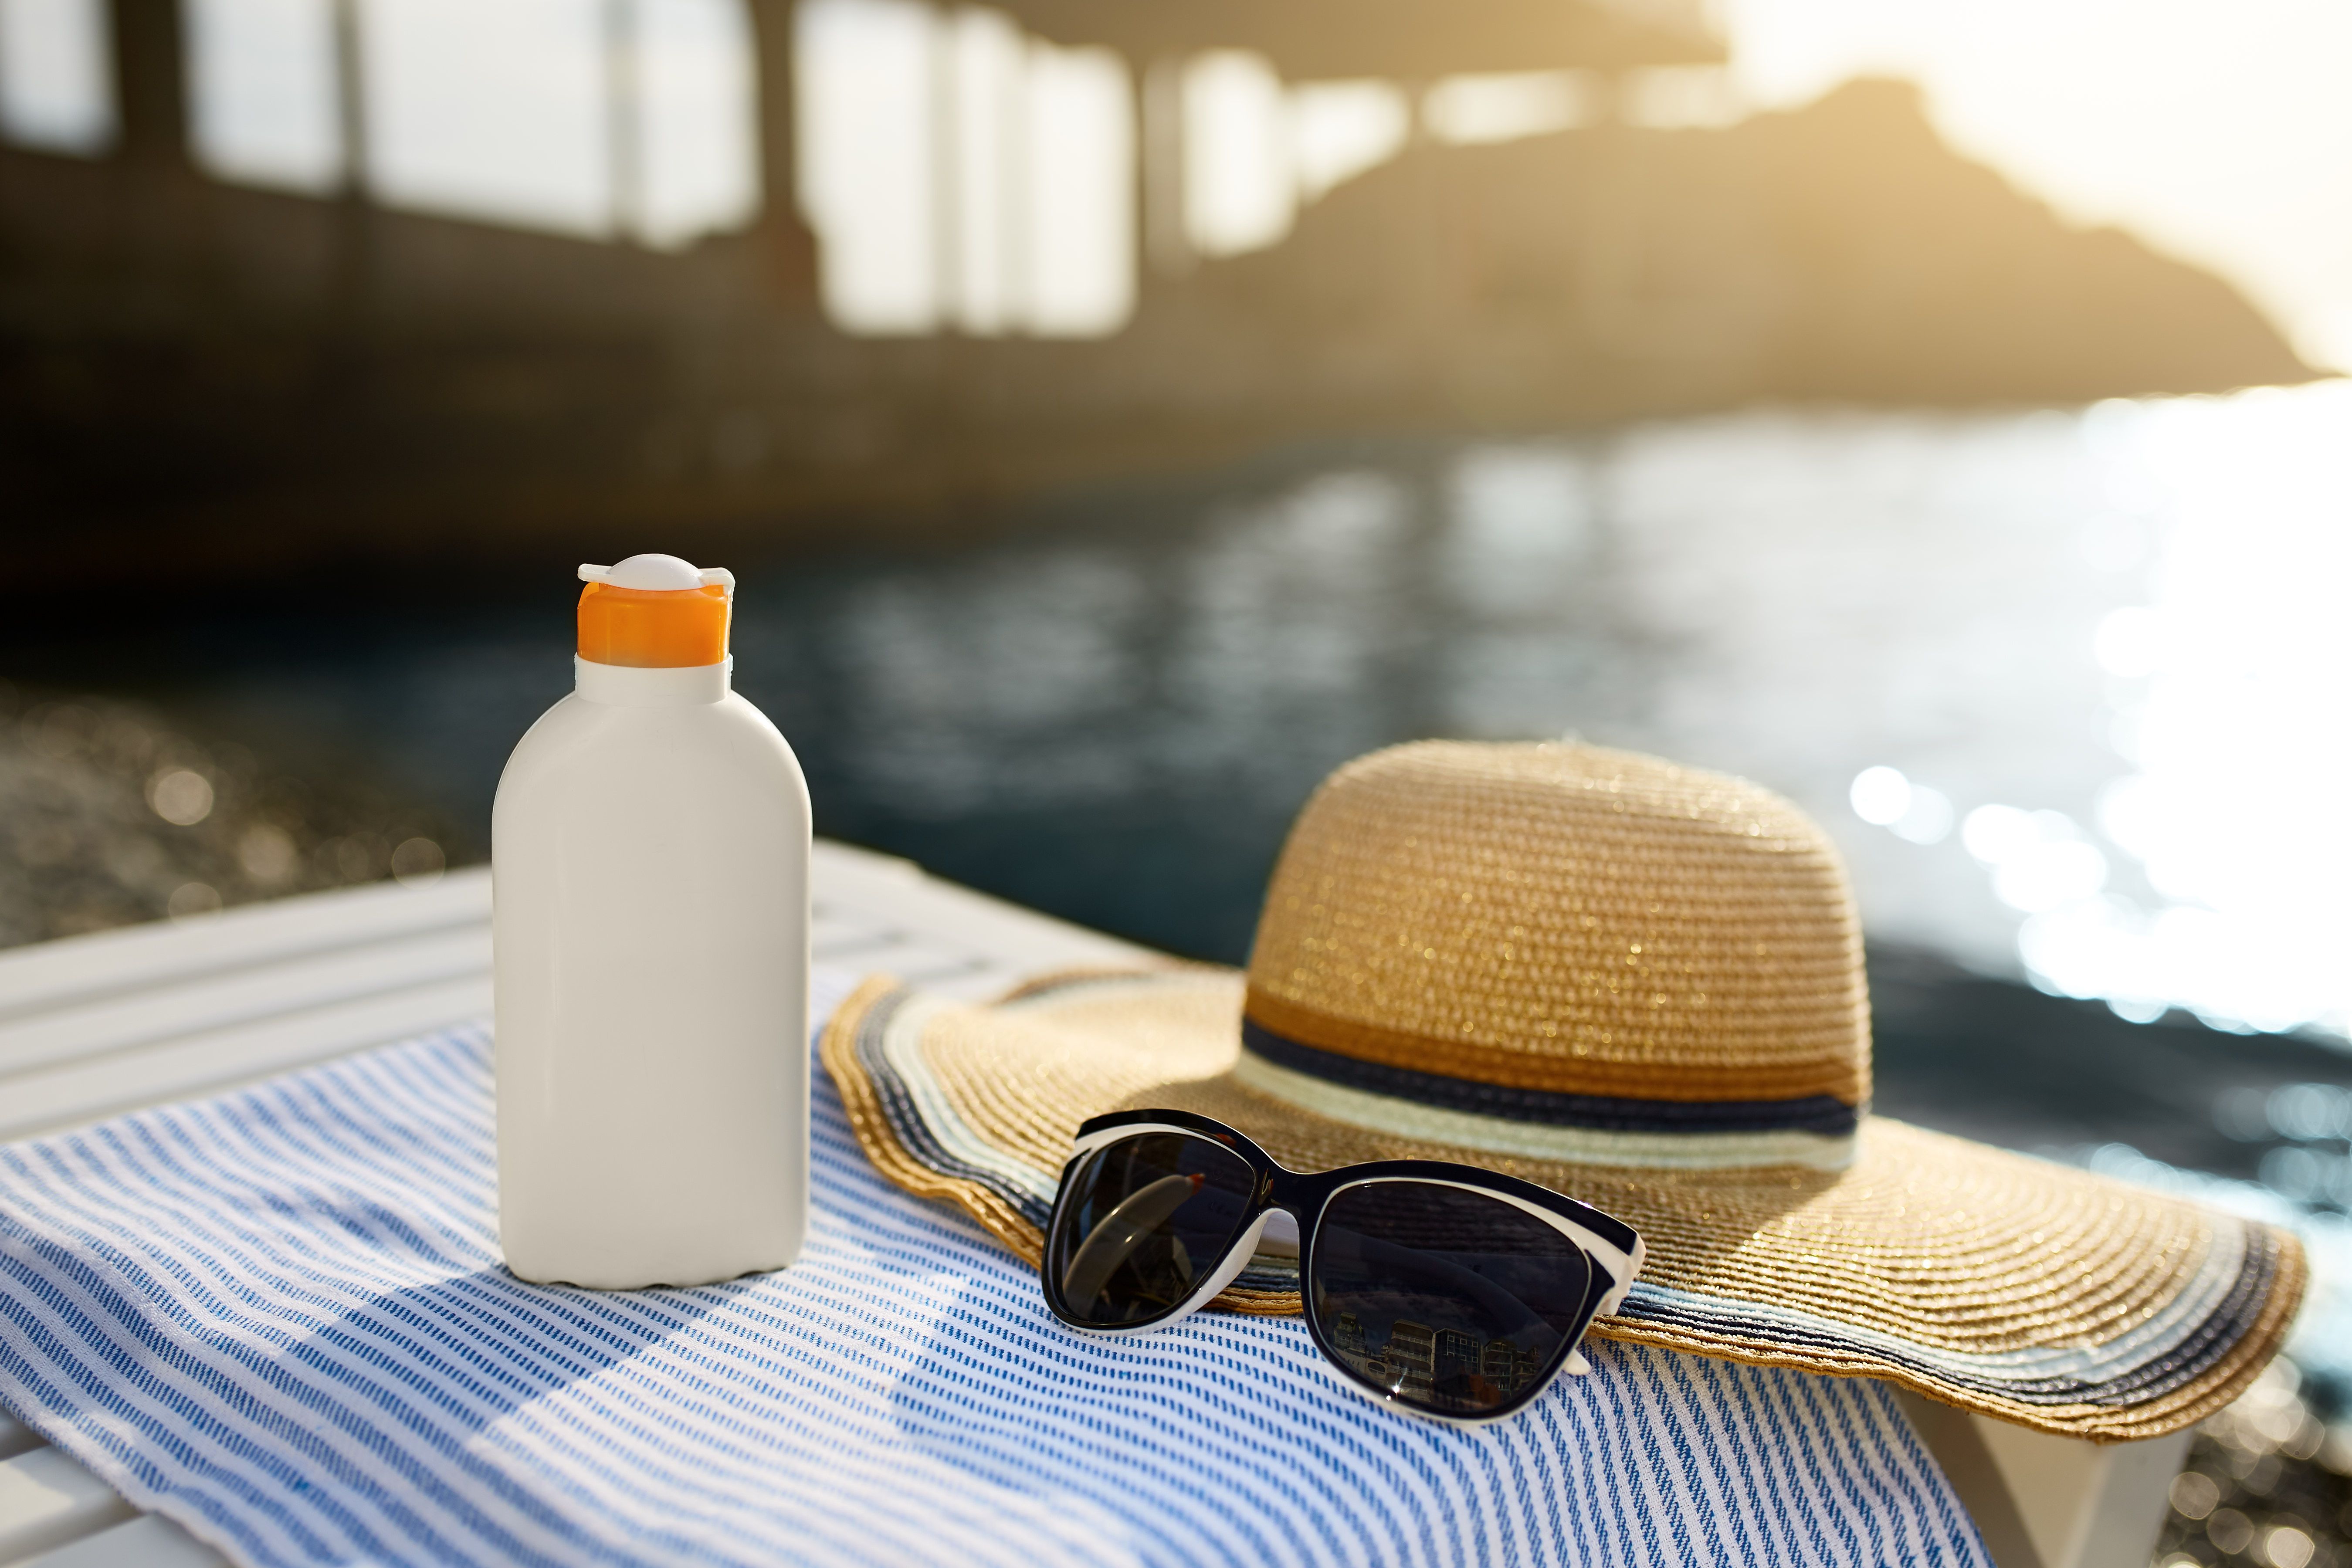 Sunscreen bottle on striped towel next to sunglasses and straw hat.